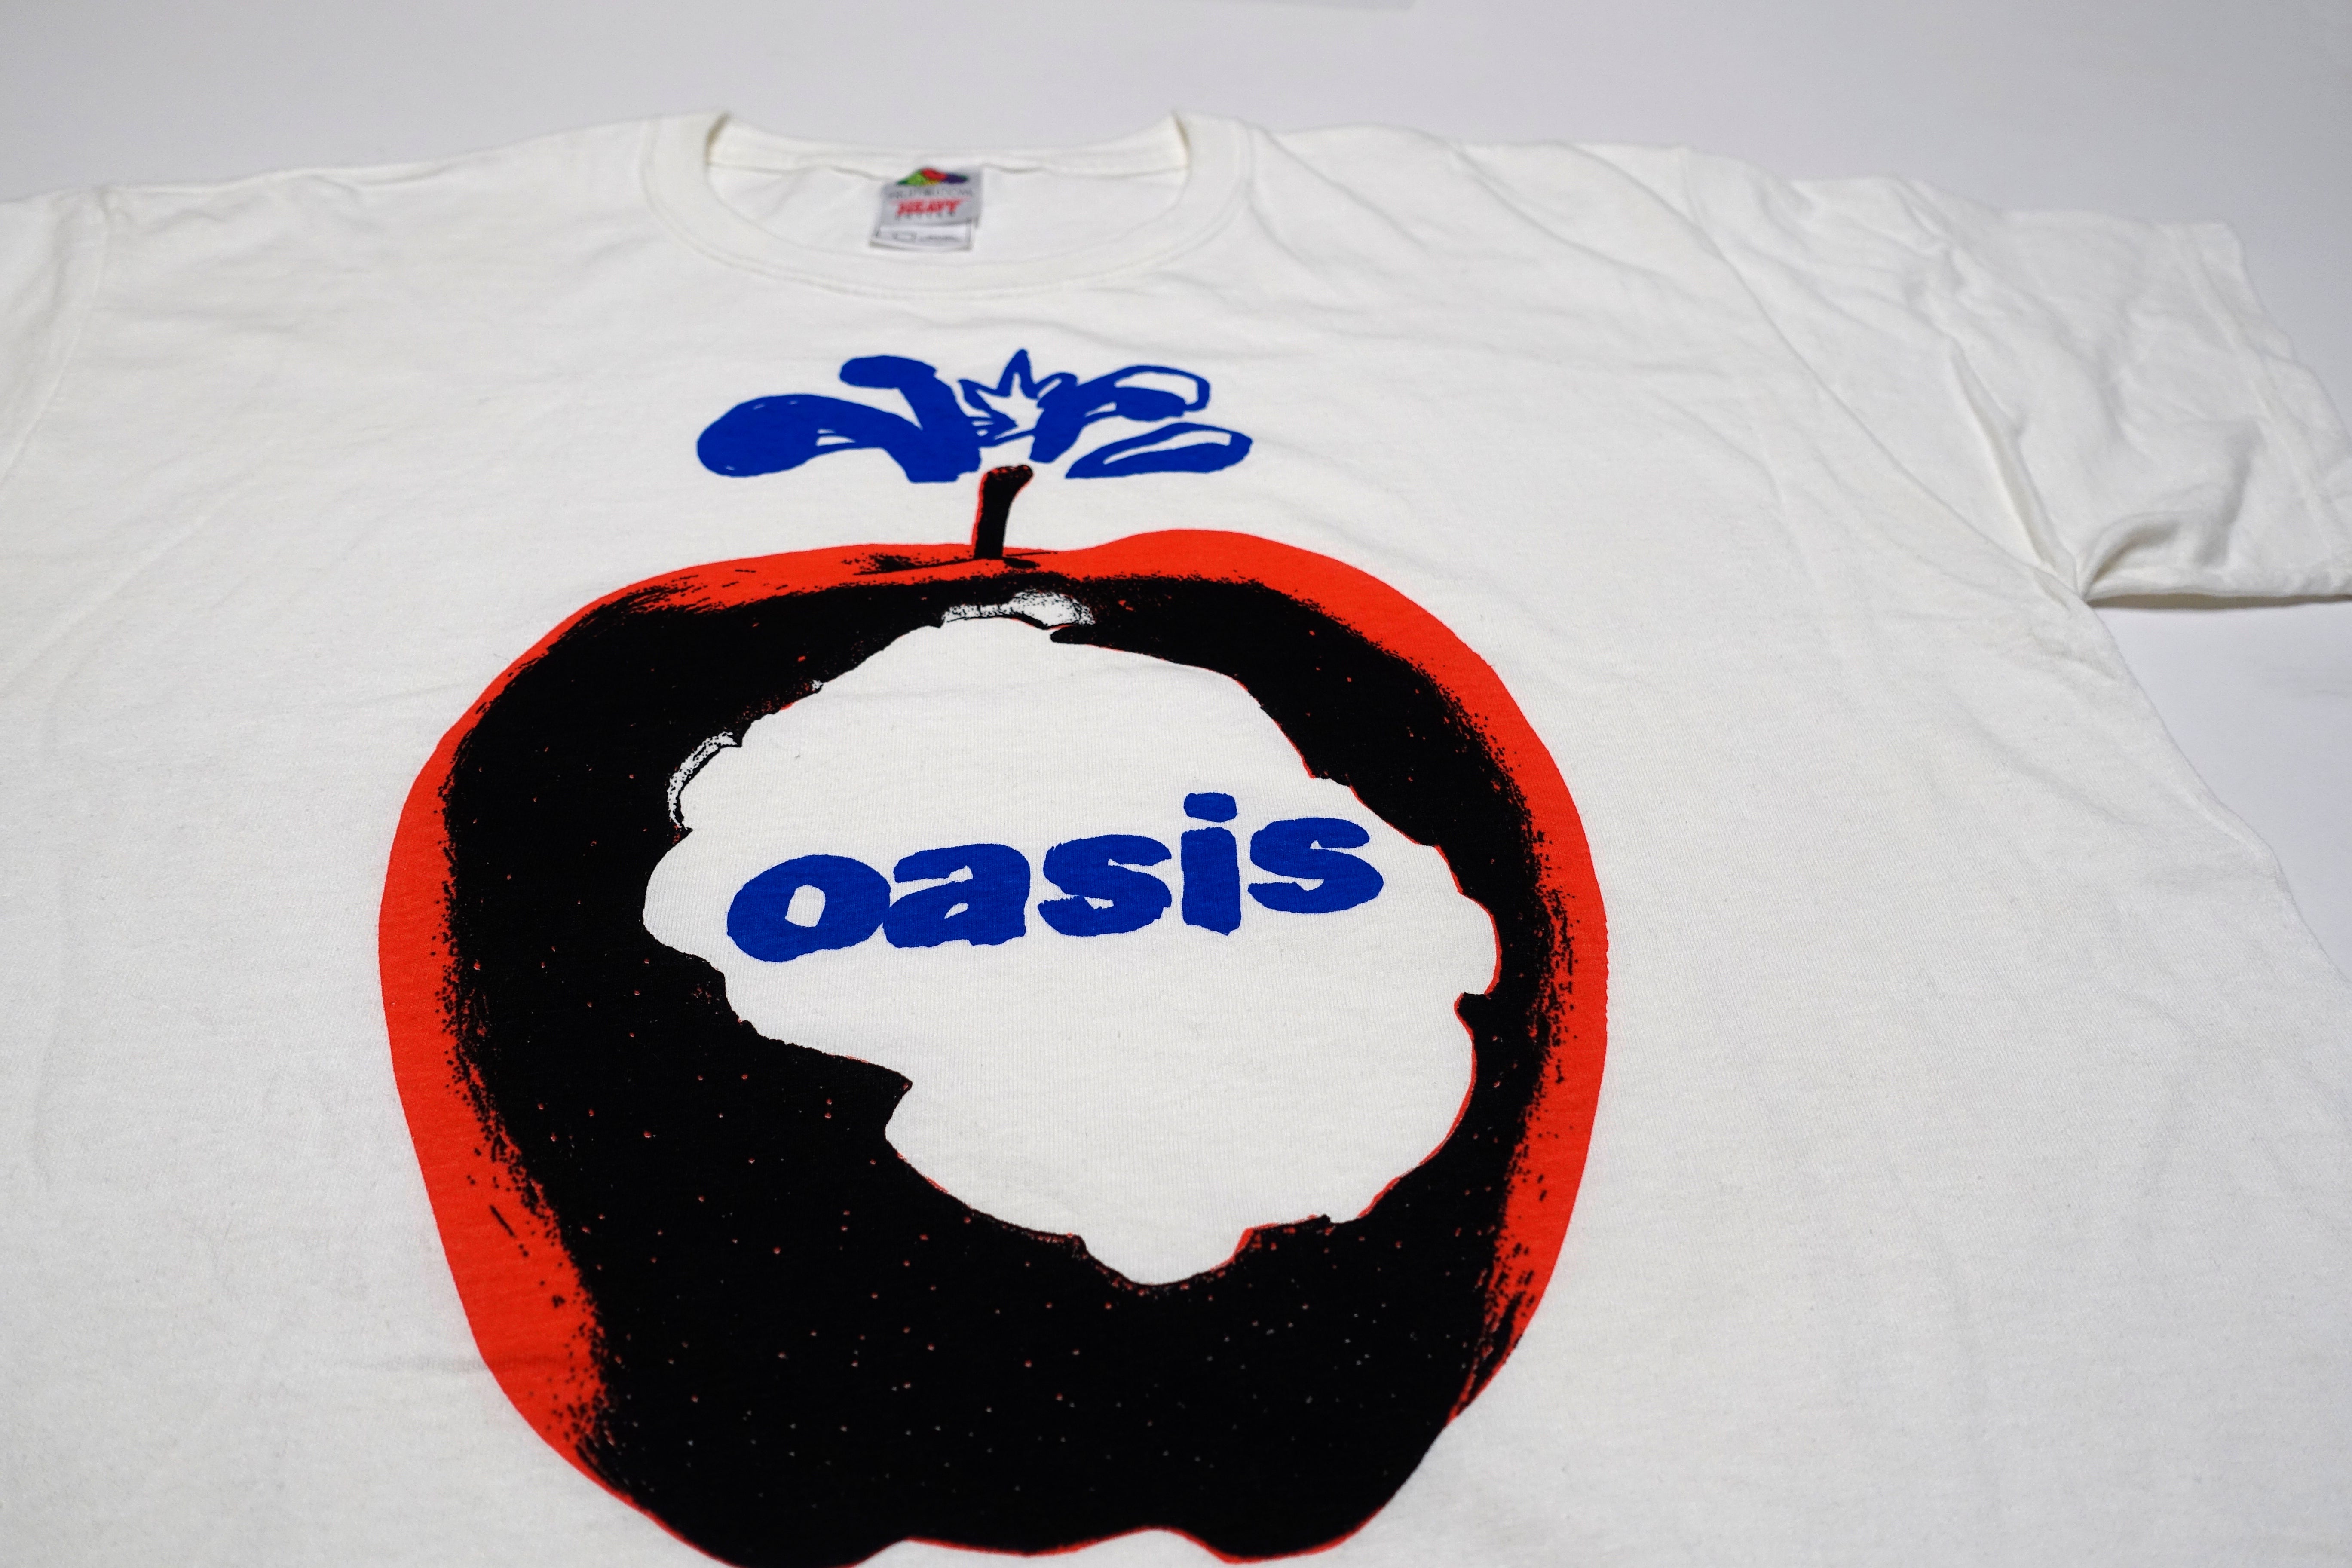 Oasis - Dig Out Your Soul "Apple" 2008 Tour Shirt Size Large